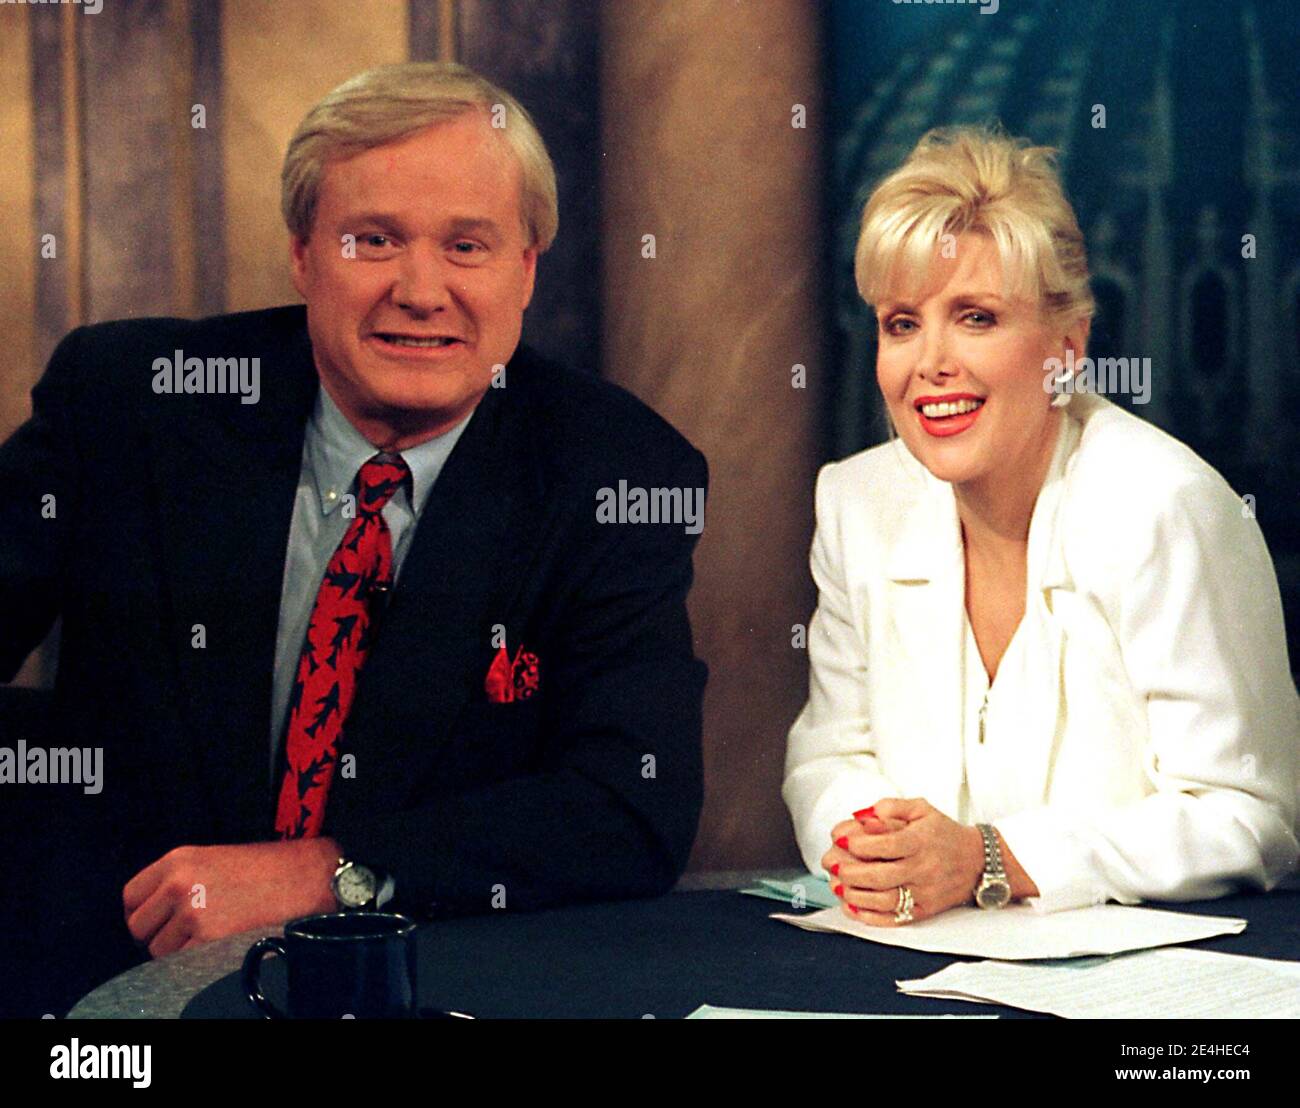 Washington, DC - June 15,1998 -- Gennifer Flowers is interviewed on the CNBC program 'Hardball with Chris Matthews'. (RESTRICTION: NO New York or New Jersey Newspapers or newspapers within a 75 mile radius of New York City) Photo by Ron Sachs/CNP/ABACAPRESS.COM Stock Photo